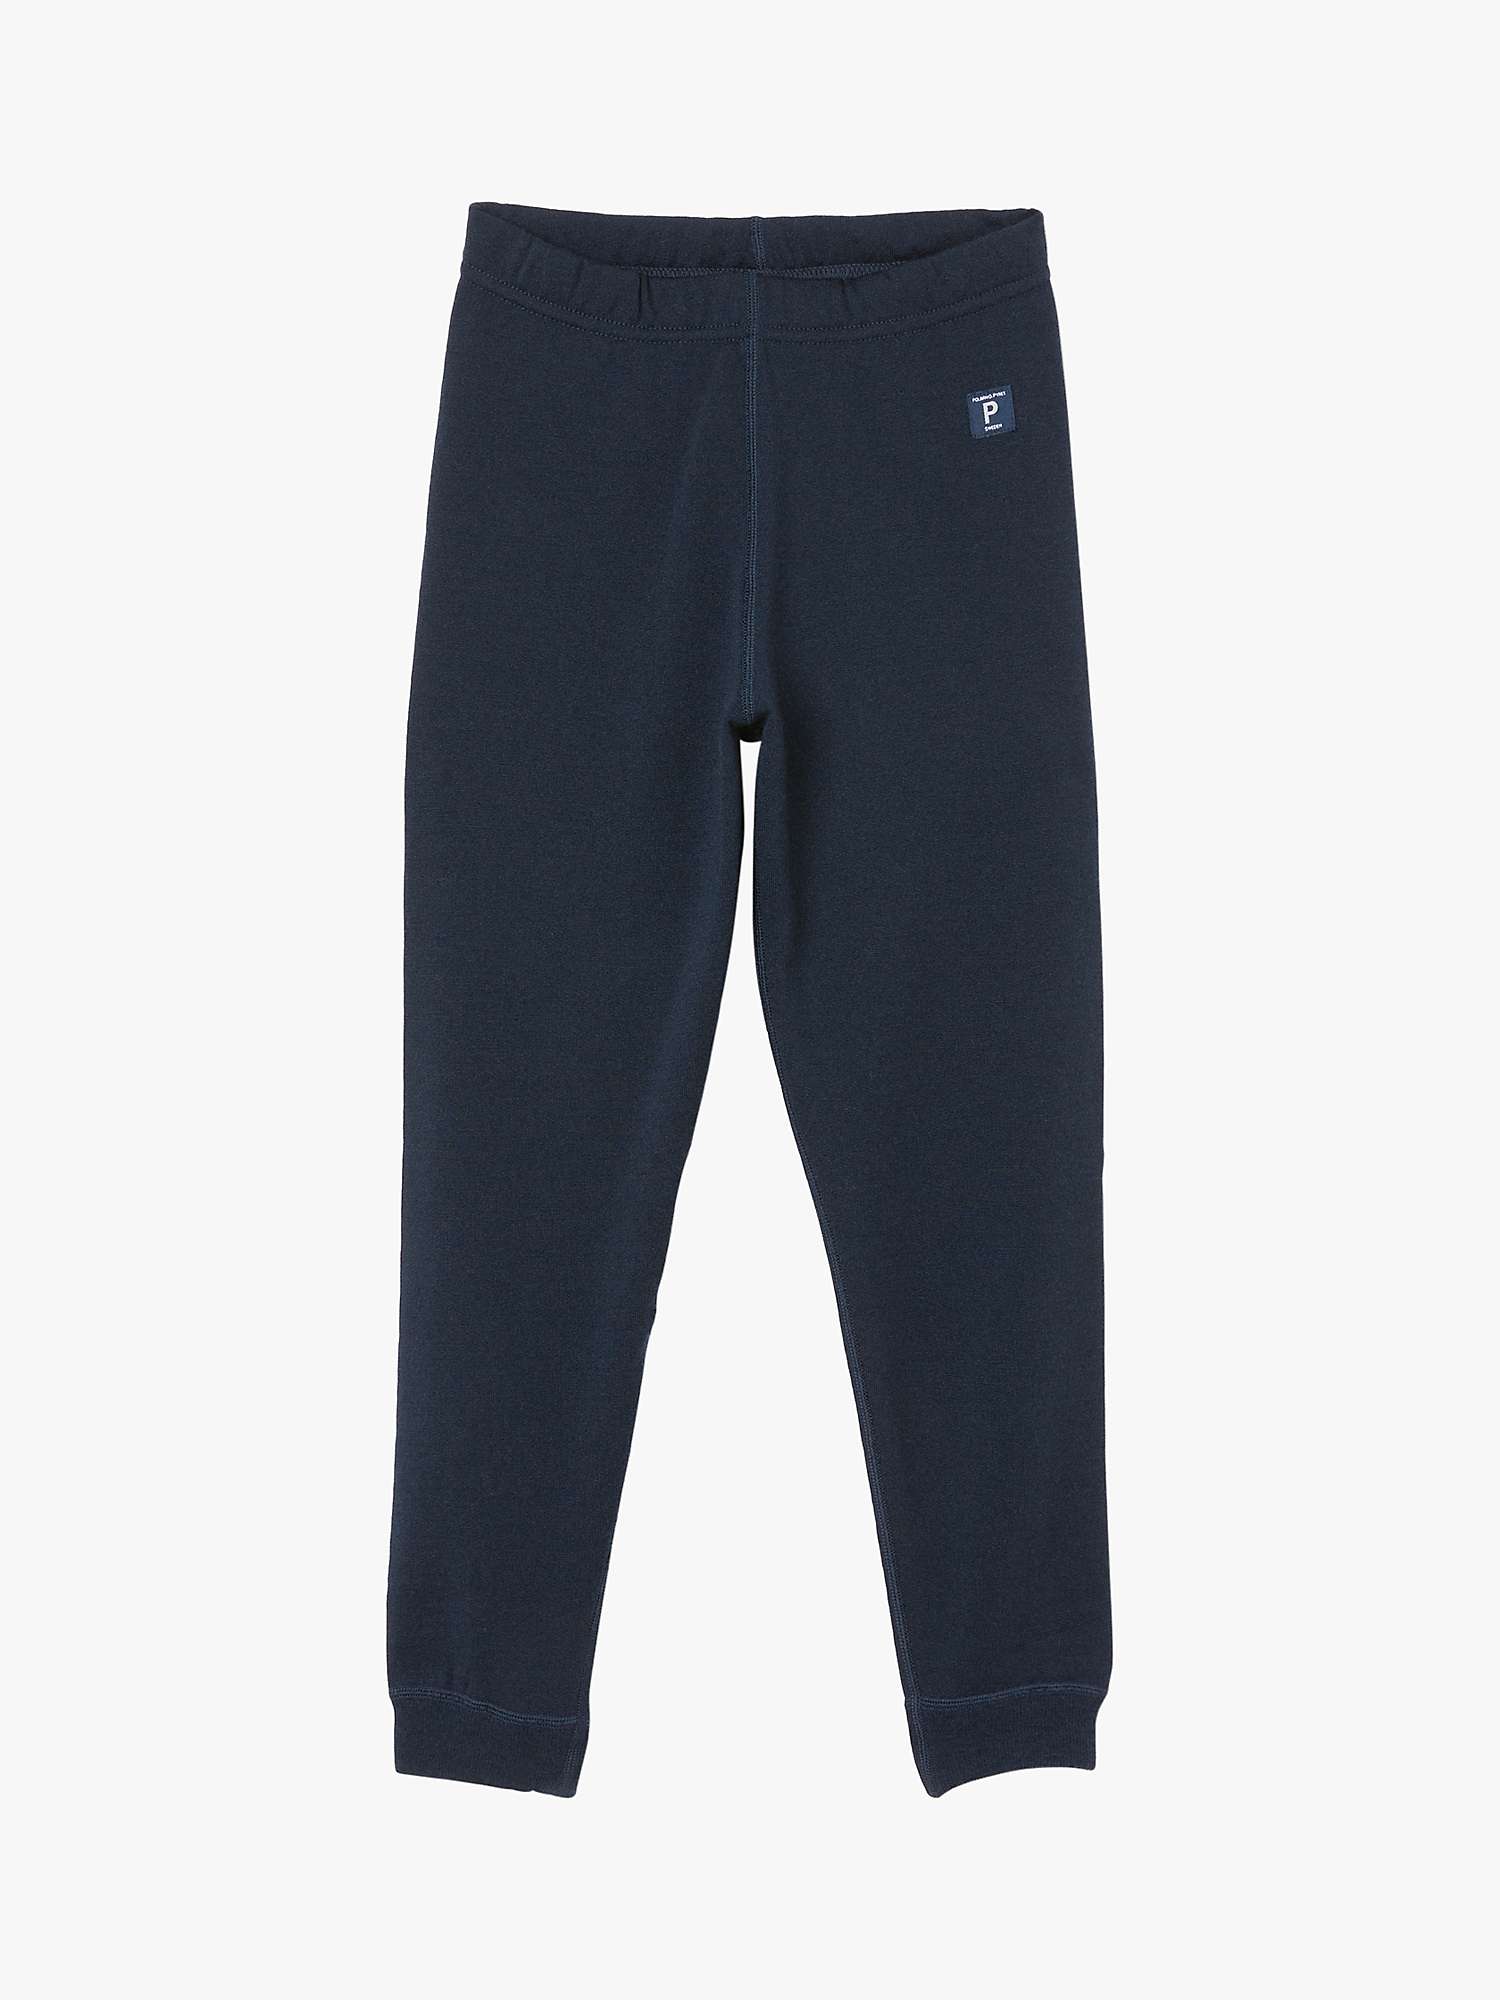 Buy Polarn O. Pyret Baby Wool Thermal Trousers Online at johnlewis.com